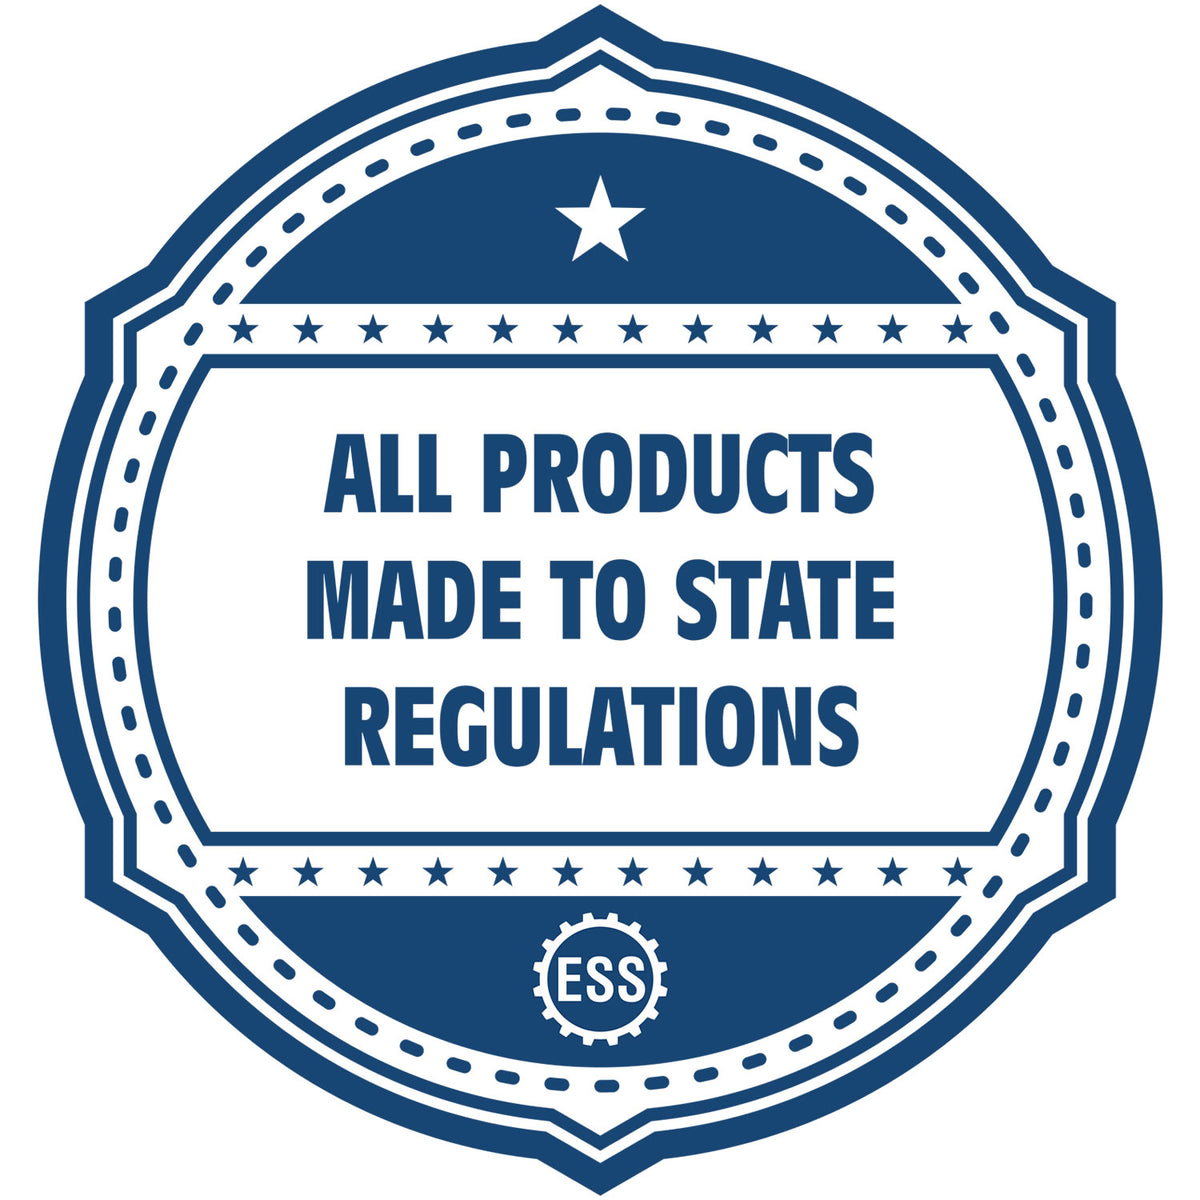 An icon or badge element for the State of Florida Extended Long Reach Engineer Seal showing that this product is made in compliance with state regulations.